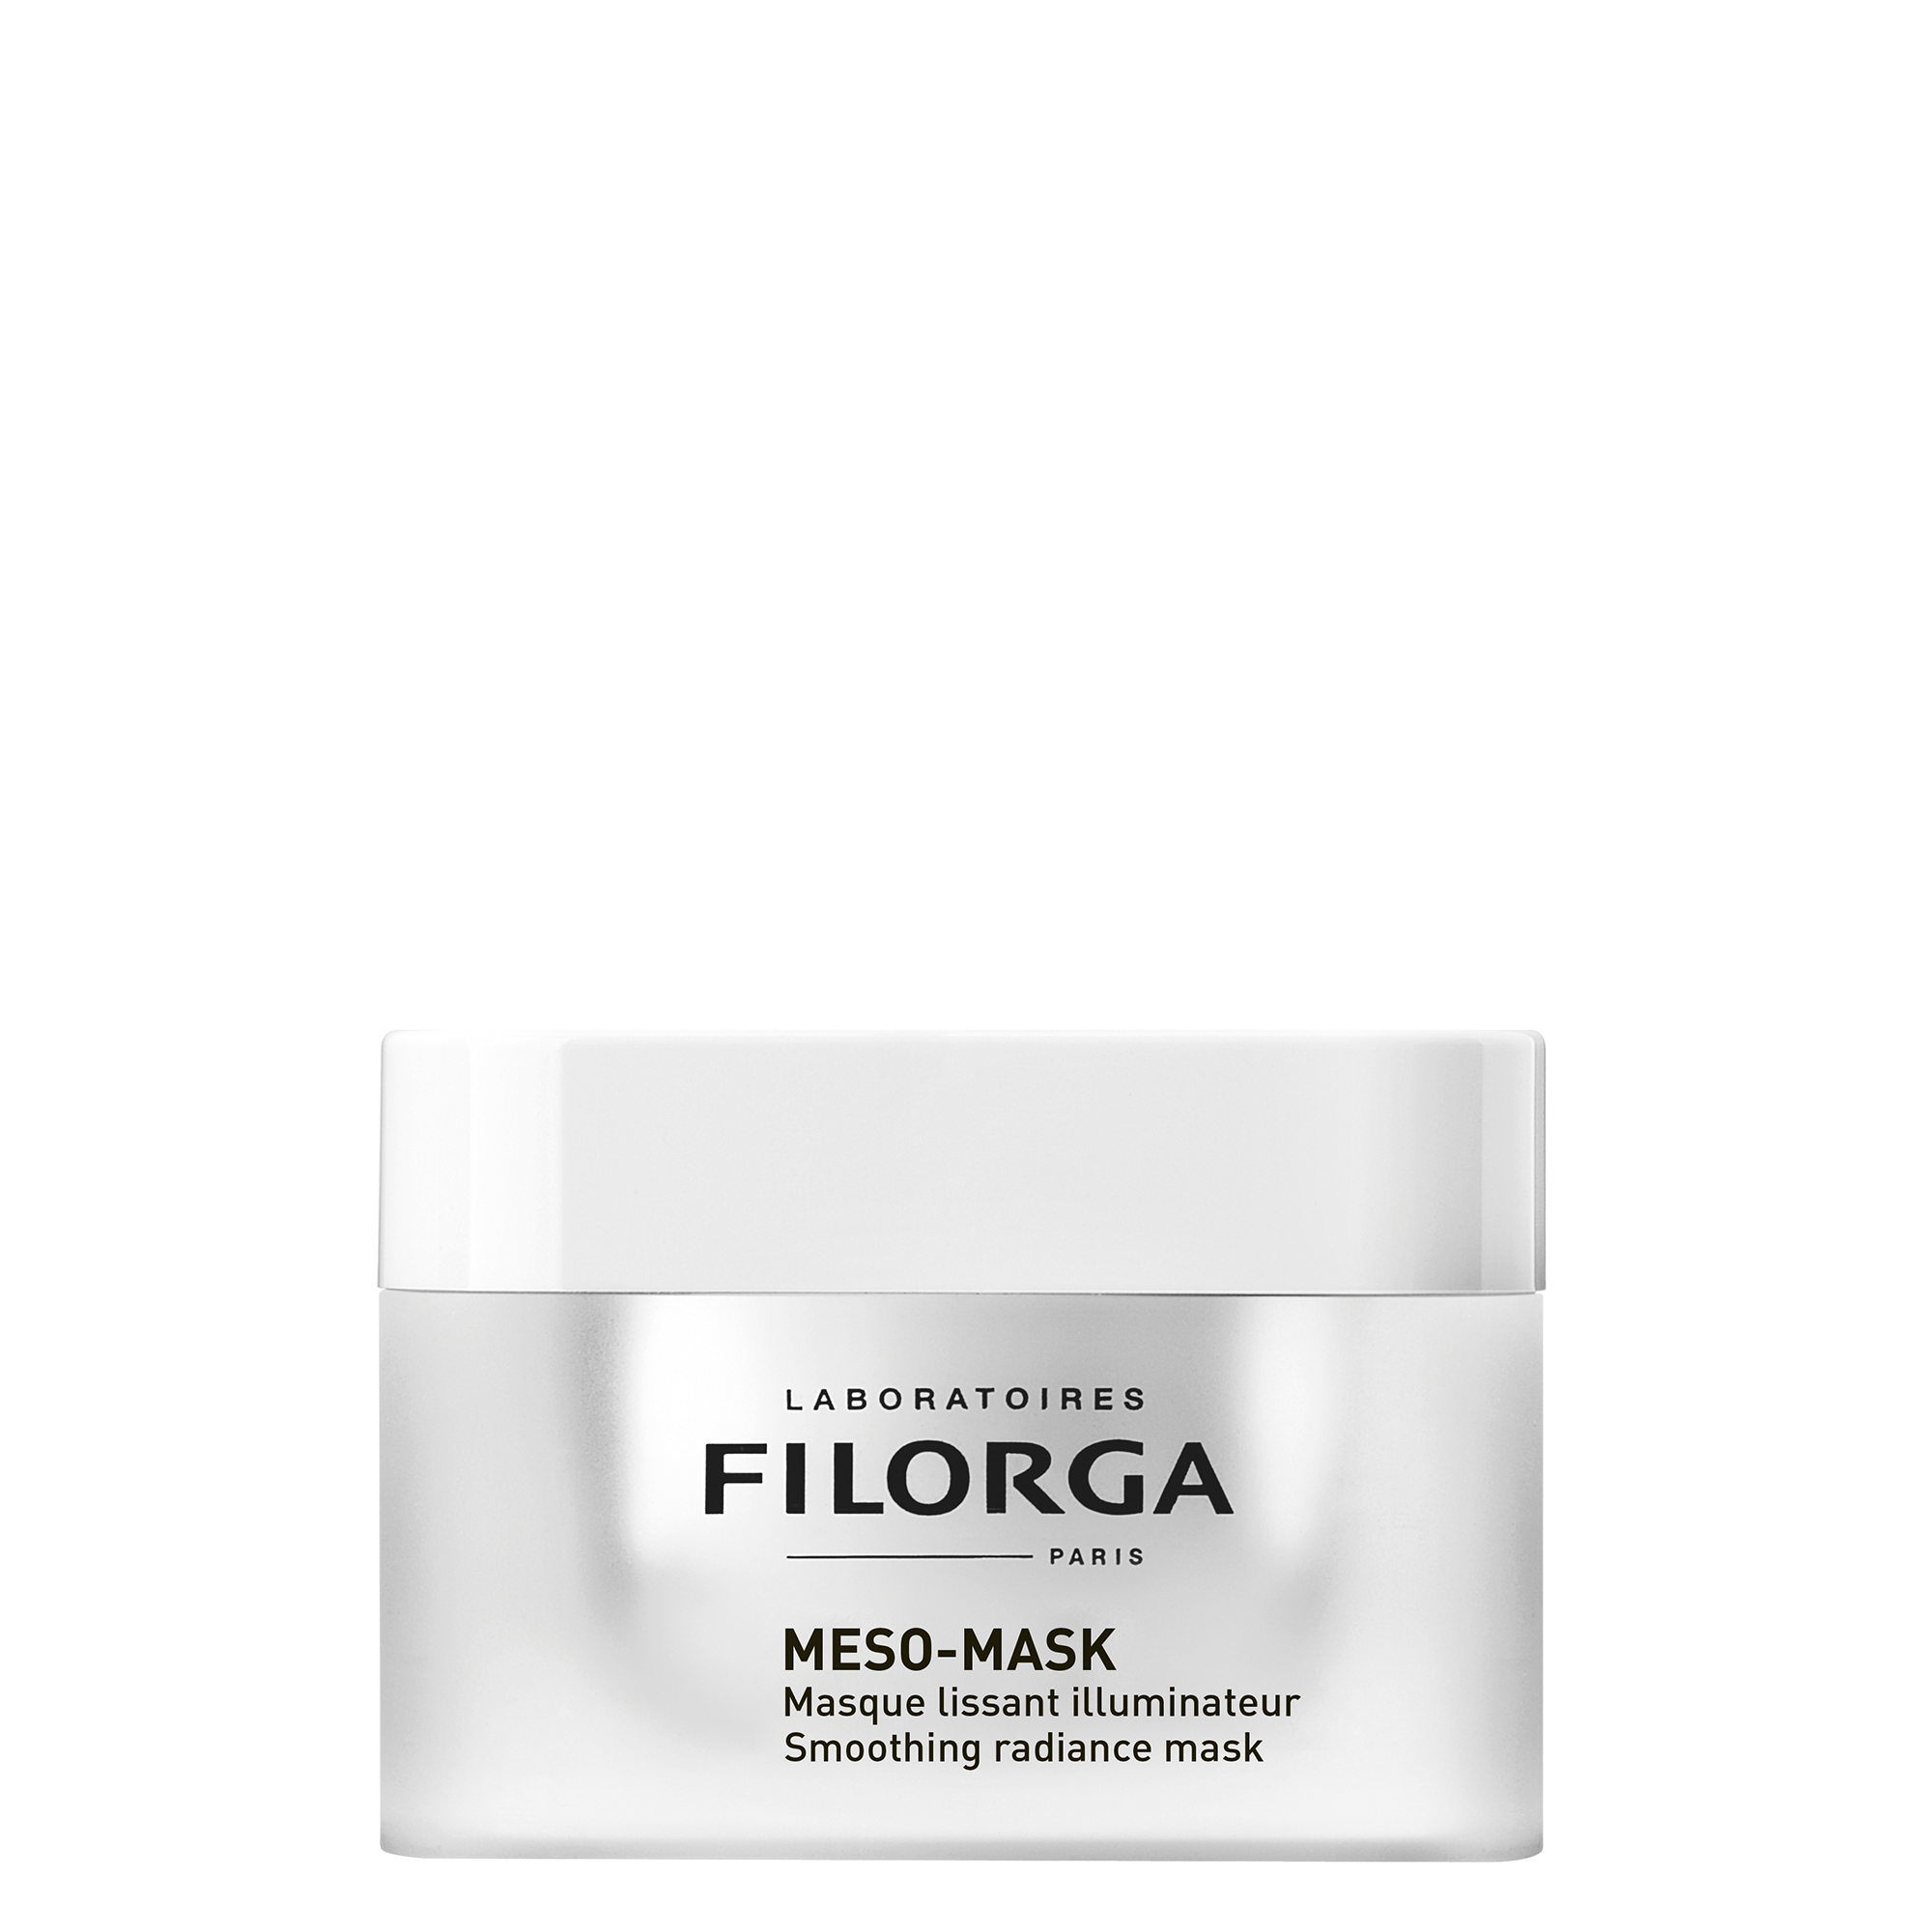 FILORGA Products  FILORGA Official Online Store